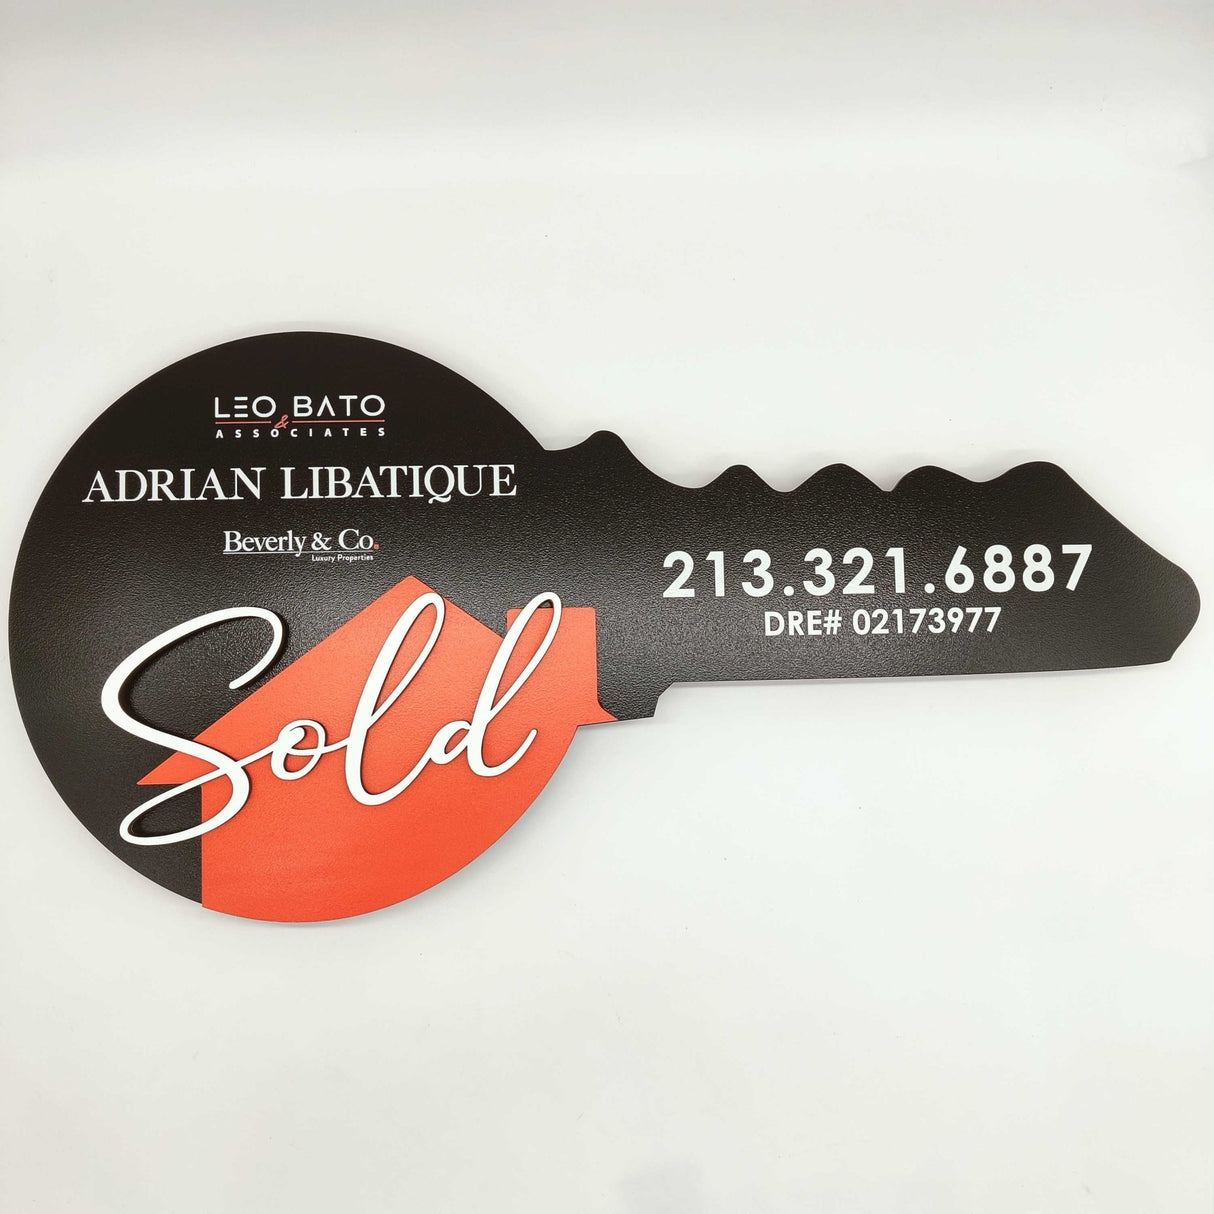 Key Shaped Sign Props «Sold» - Real Estate Store